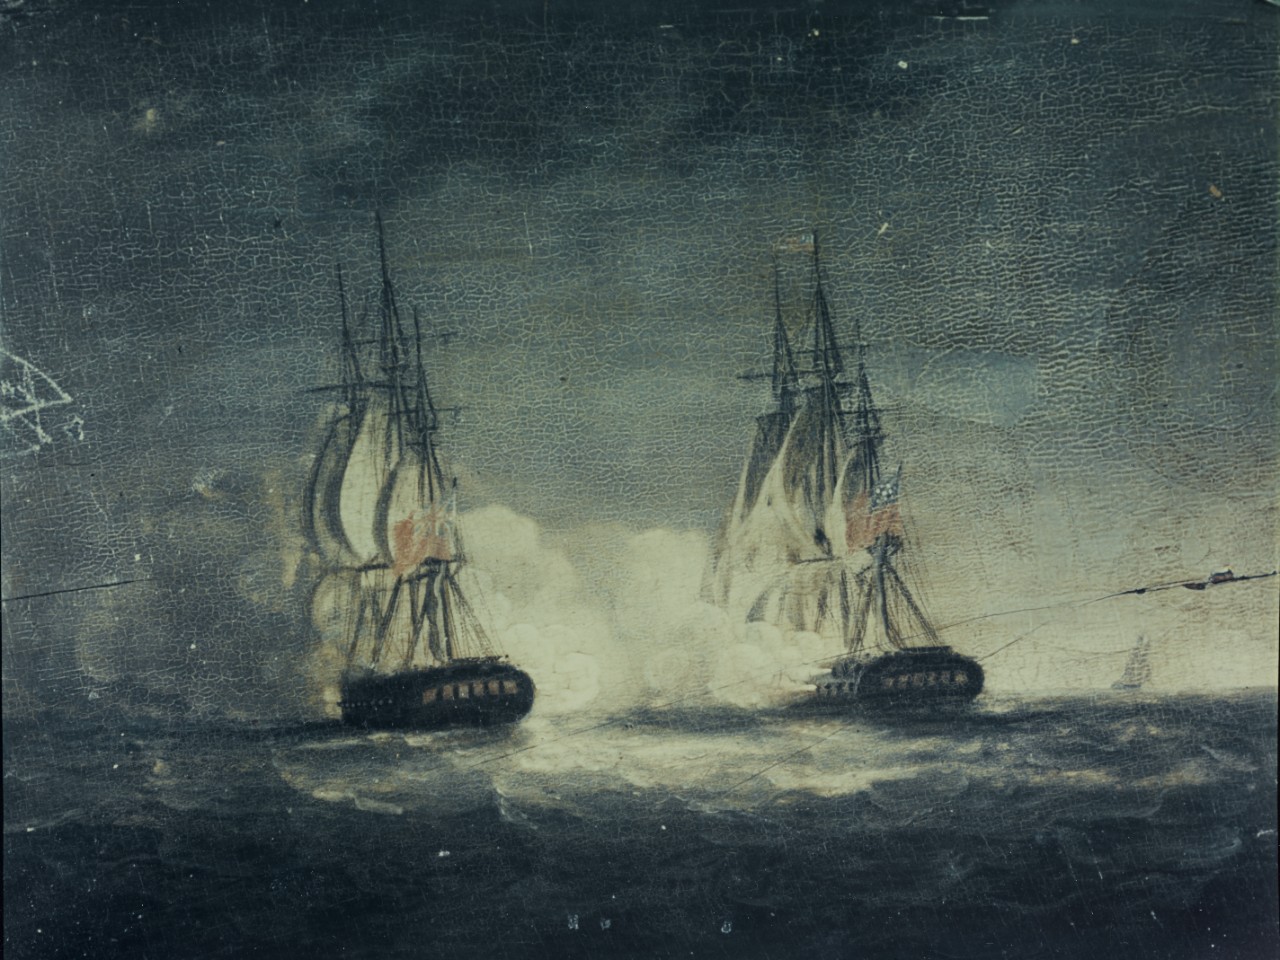 Photo #: 80-G-K-12670 Action between USS Constitution and HMS Guerriere, 19 August 1812